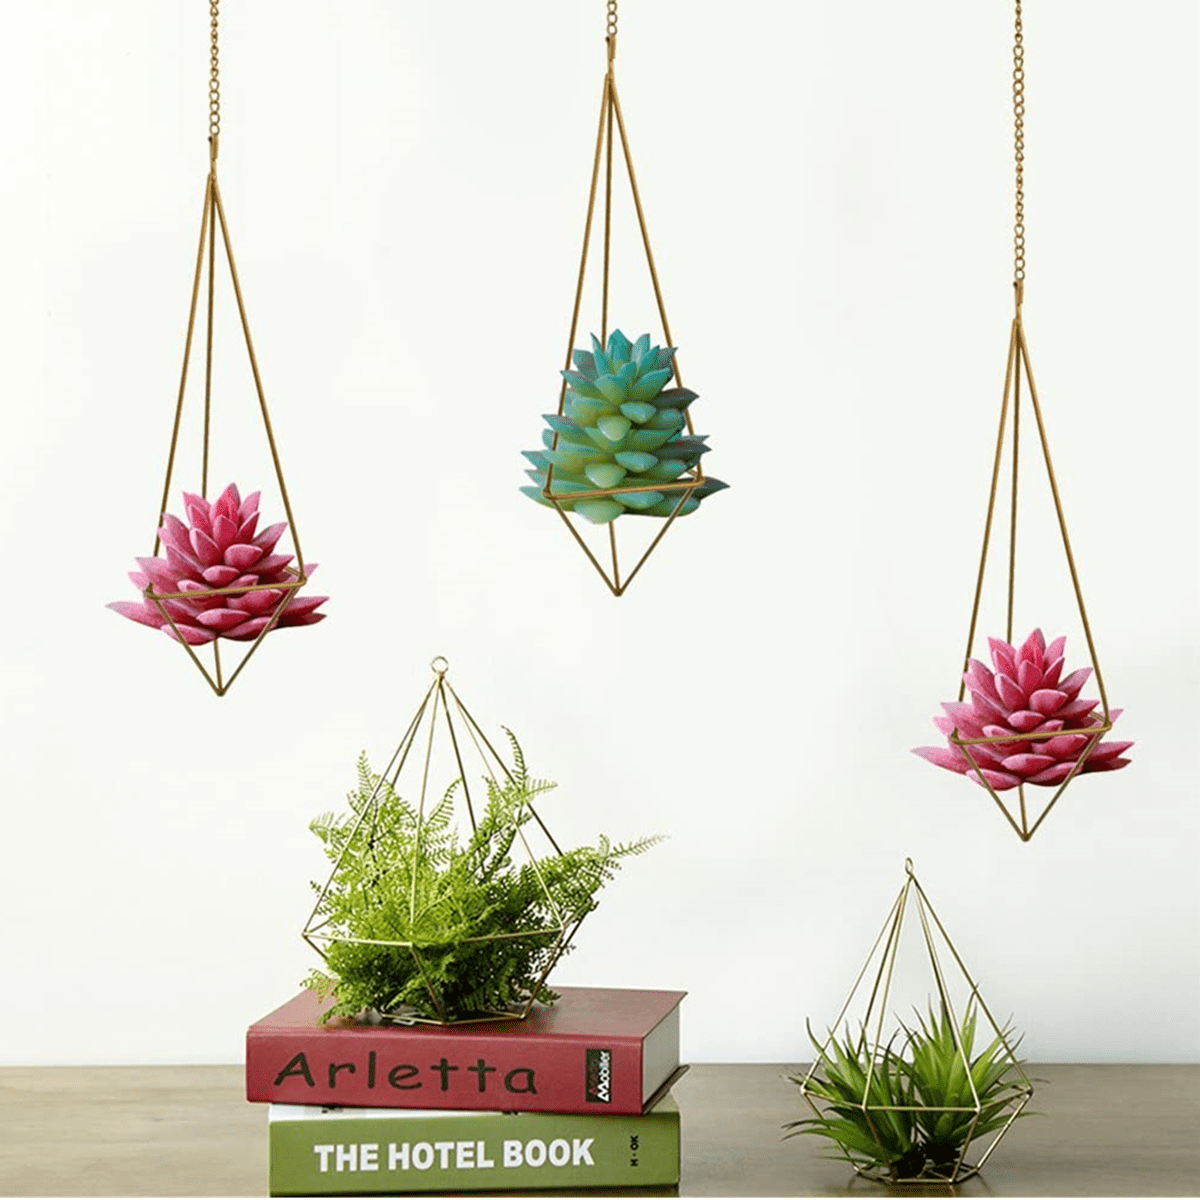 2 Sizes Metal Air Plant Rack Tillandsia Hanger Display Himmeli Planter with Chains 4 Pack Senmubery Hanging Air Plant Holder